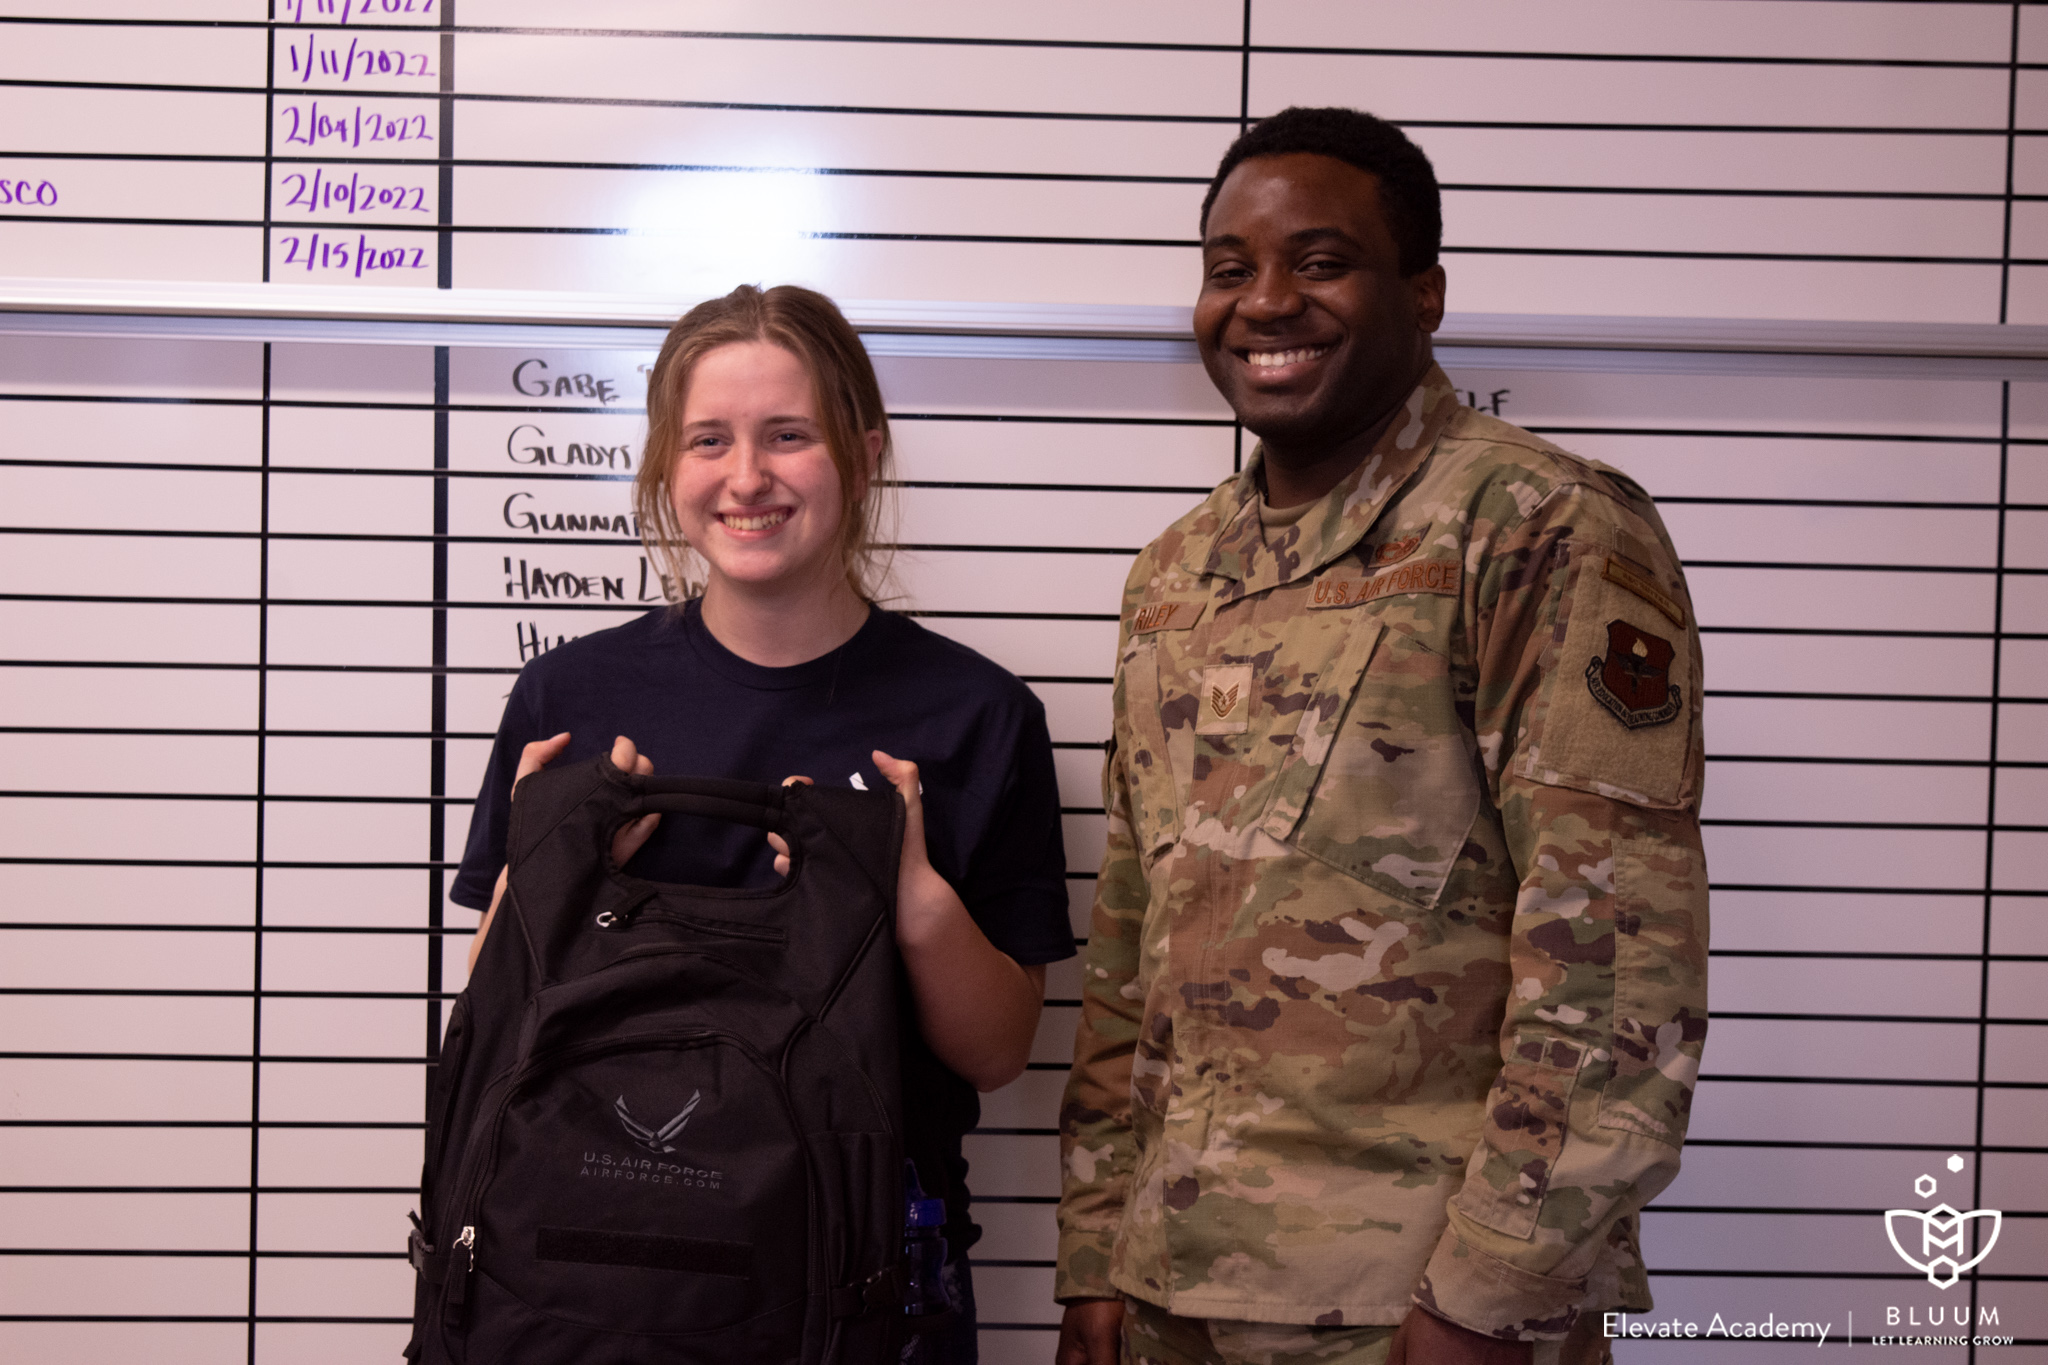 Senior Megan Benson stands in front of the ‘80 for 80’ board with her new Air Force backpack, next to Technical Sargent in the US Air Force and Nampa Area Air Force Recruiter Paul Riley.